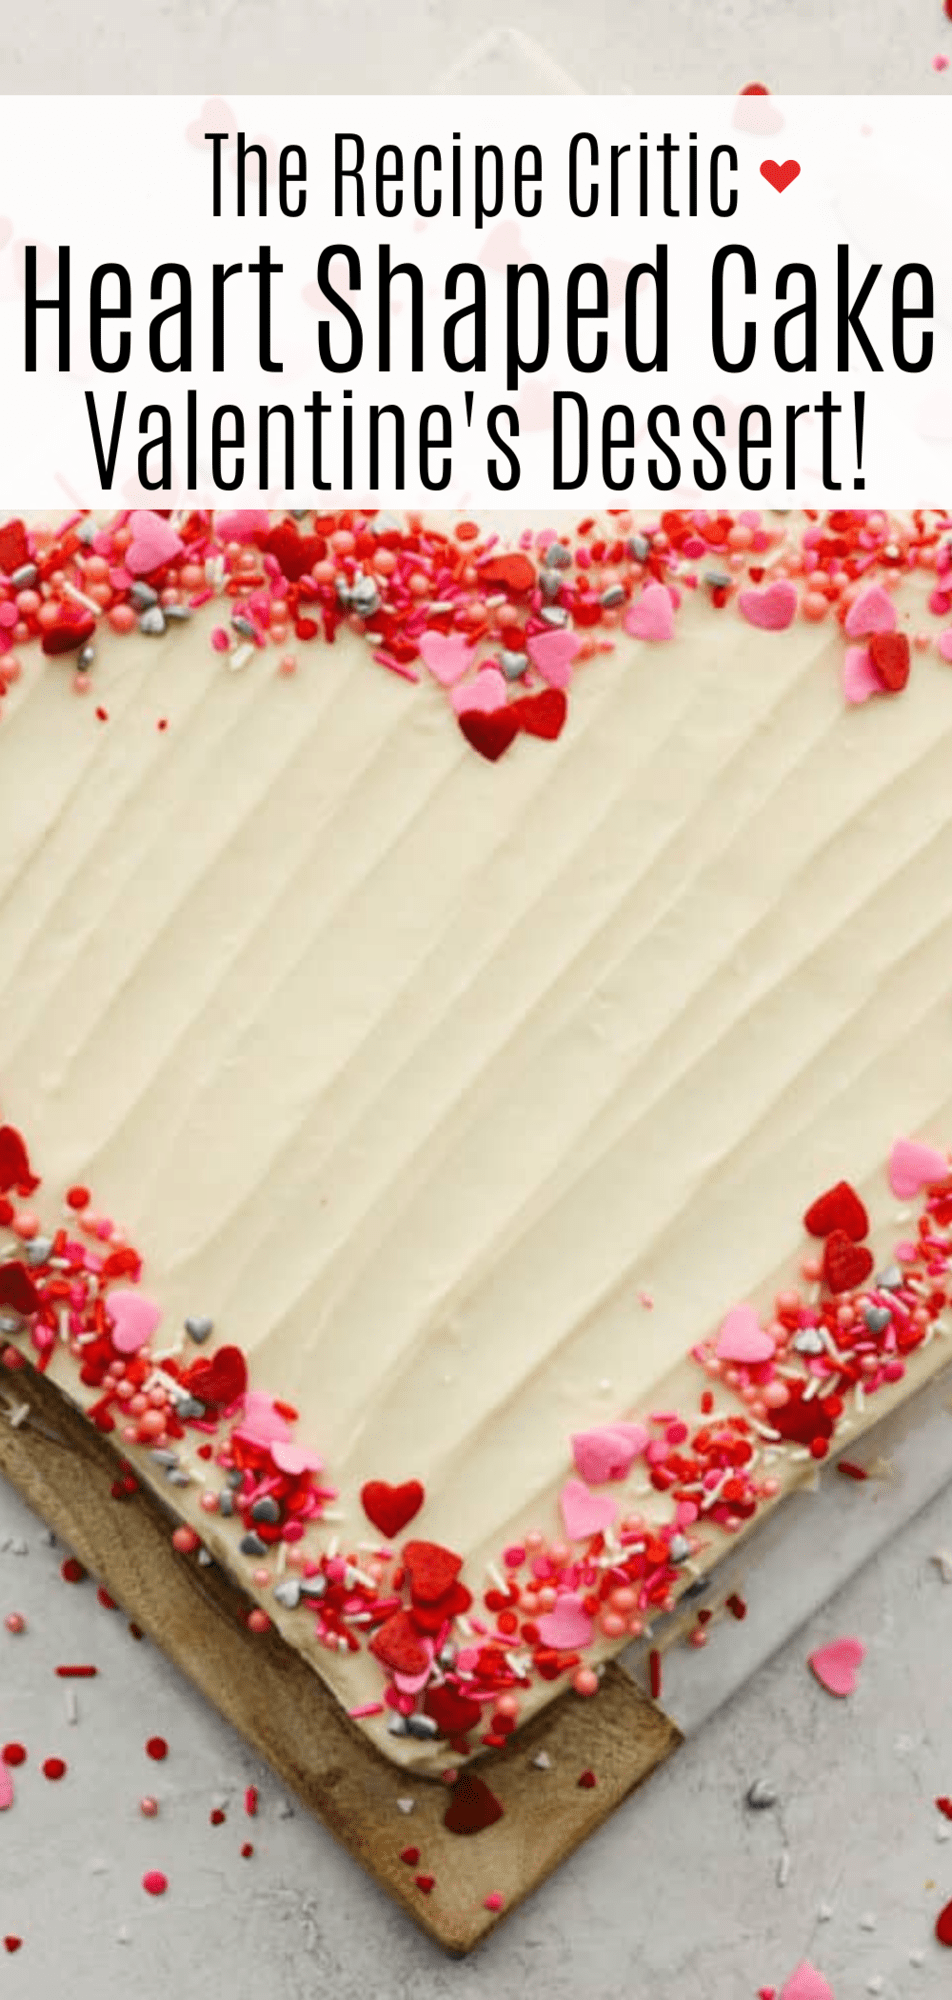 How to Make a Heart Shaped Cake Recipe - News Afric
